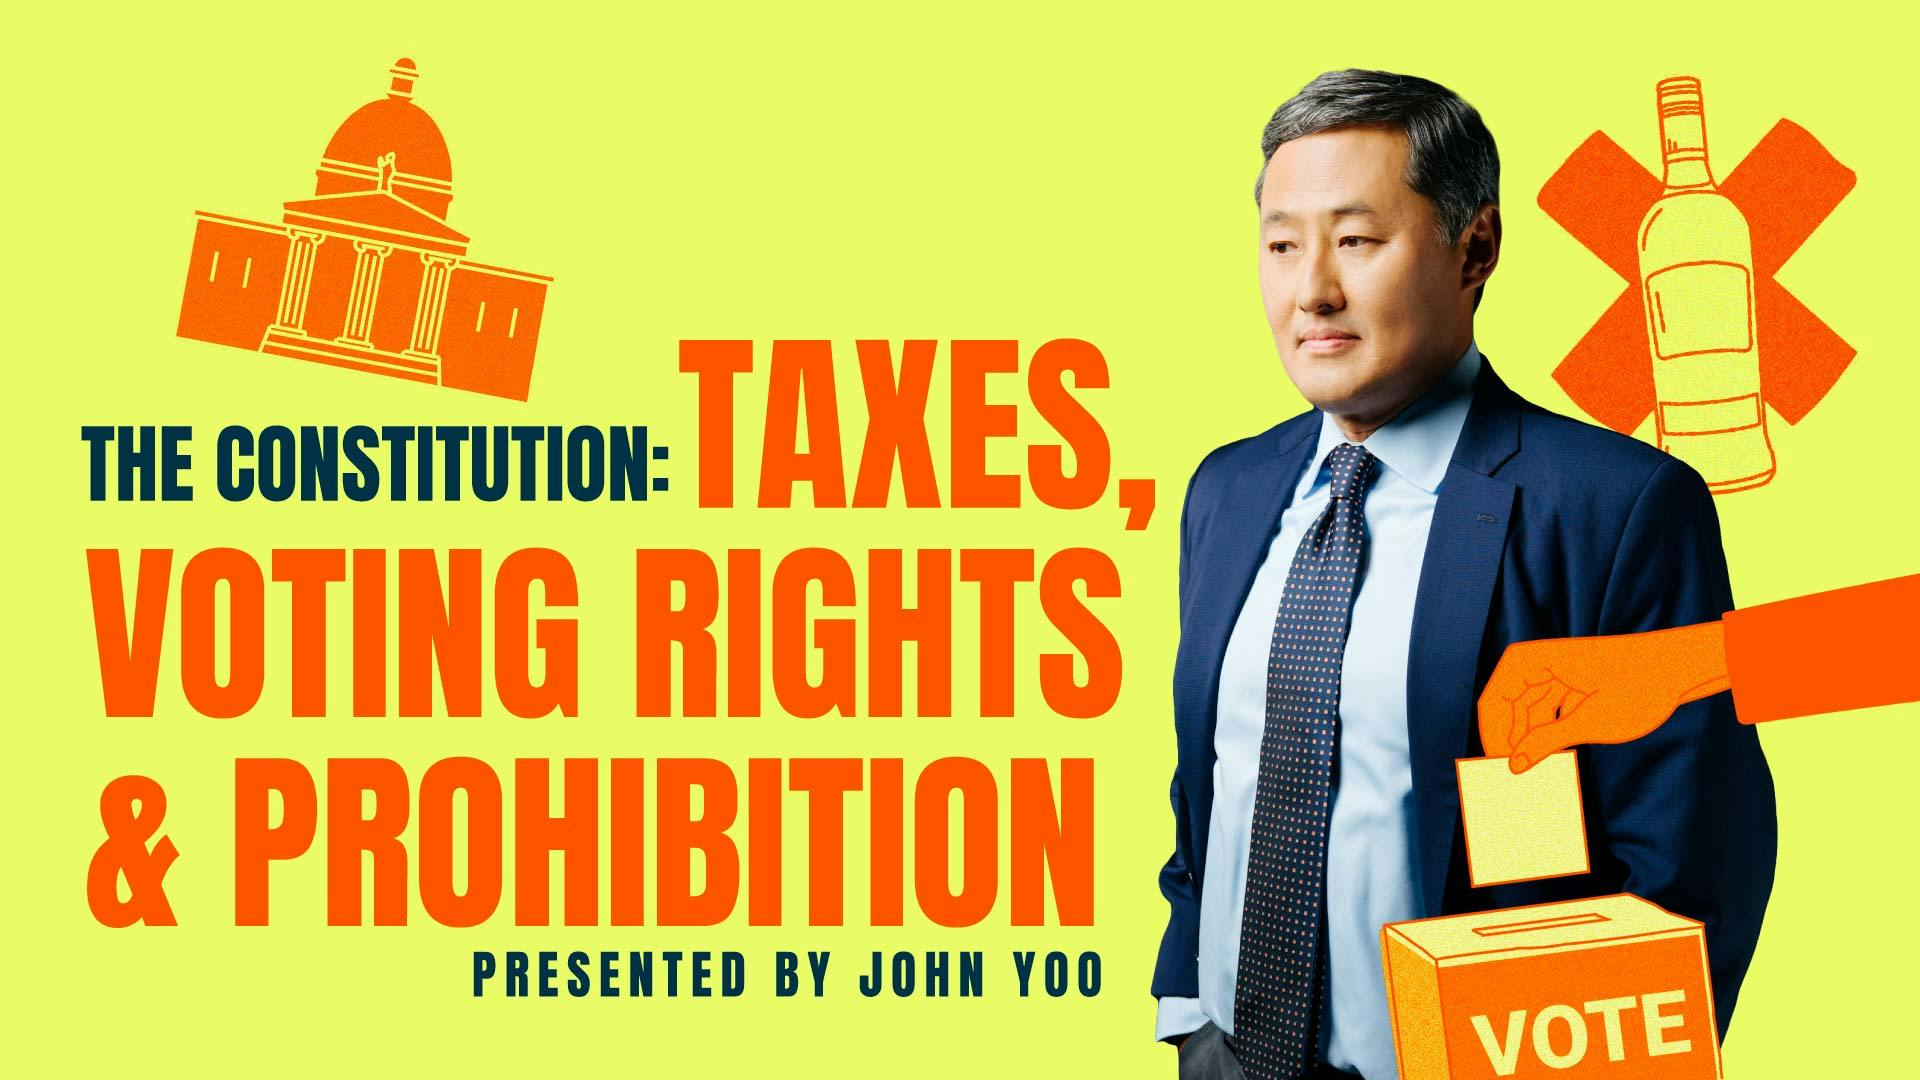 The Constitution: Taxes, Voting Rights, and Prohibition